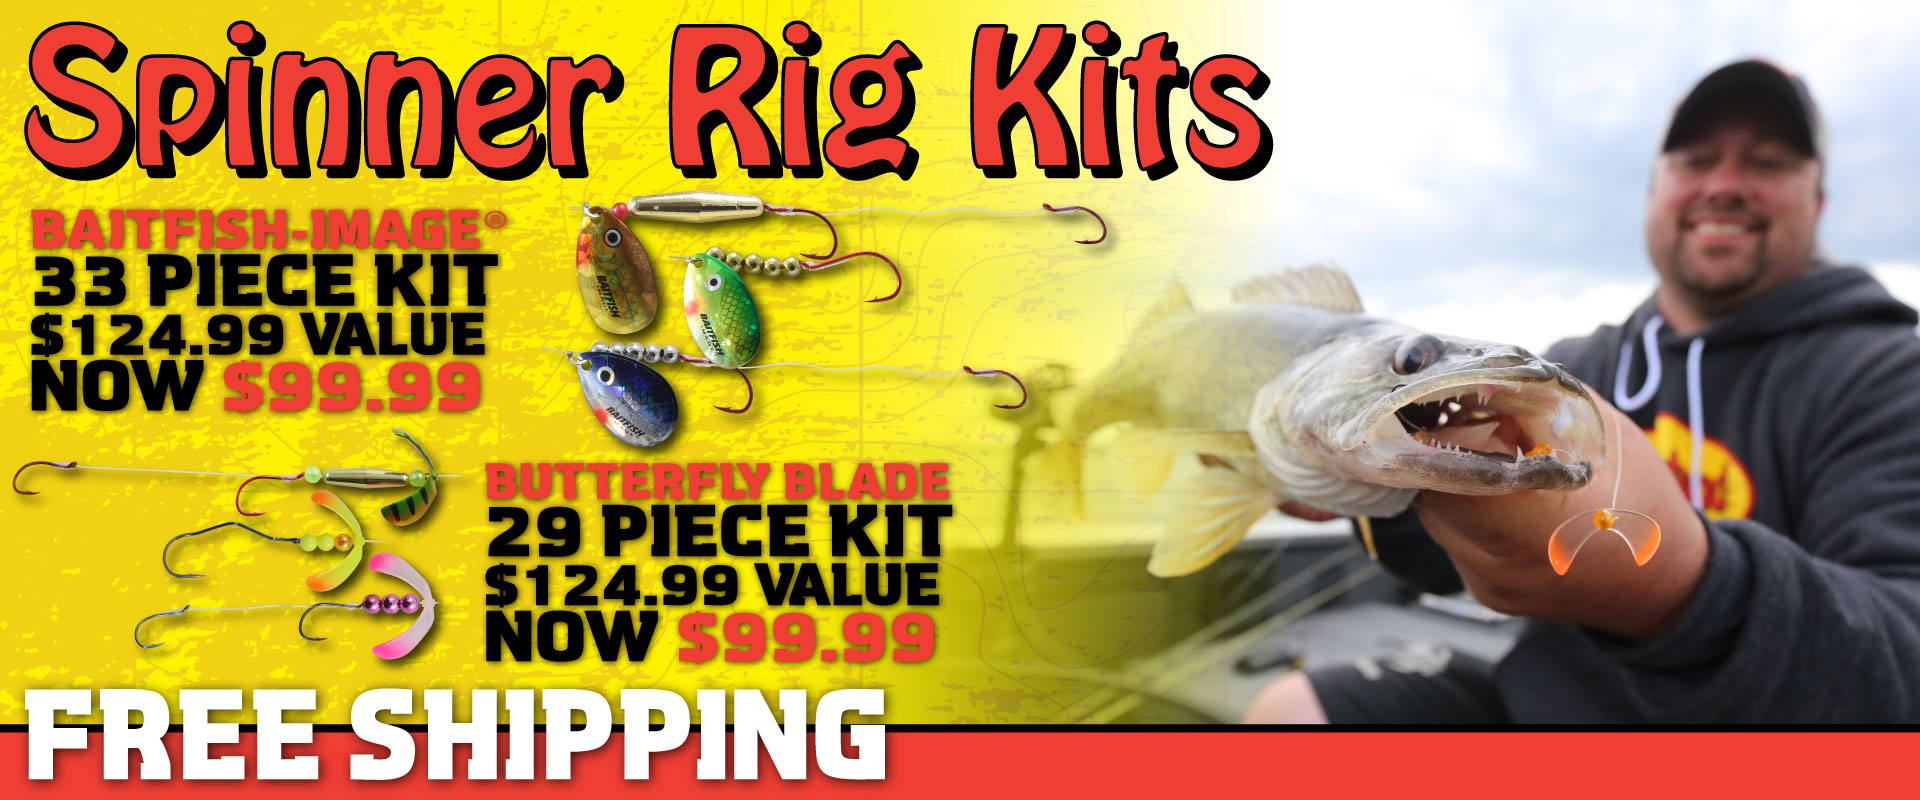 Baitfish-Image and Butterfly Blade Spinner Rig Kits from Northland Fishing Tackle on sale now